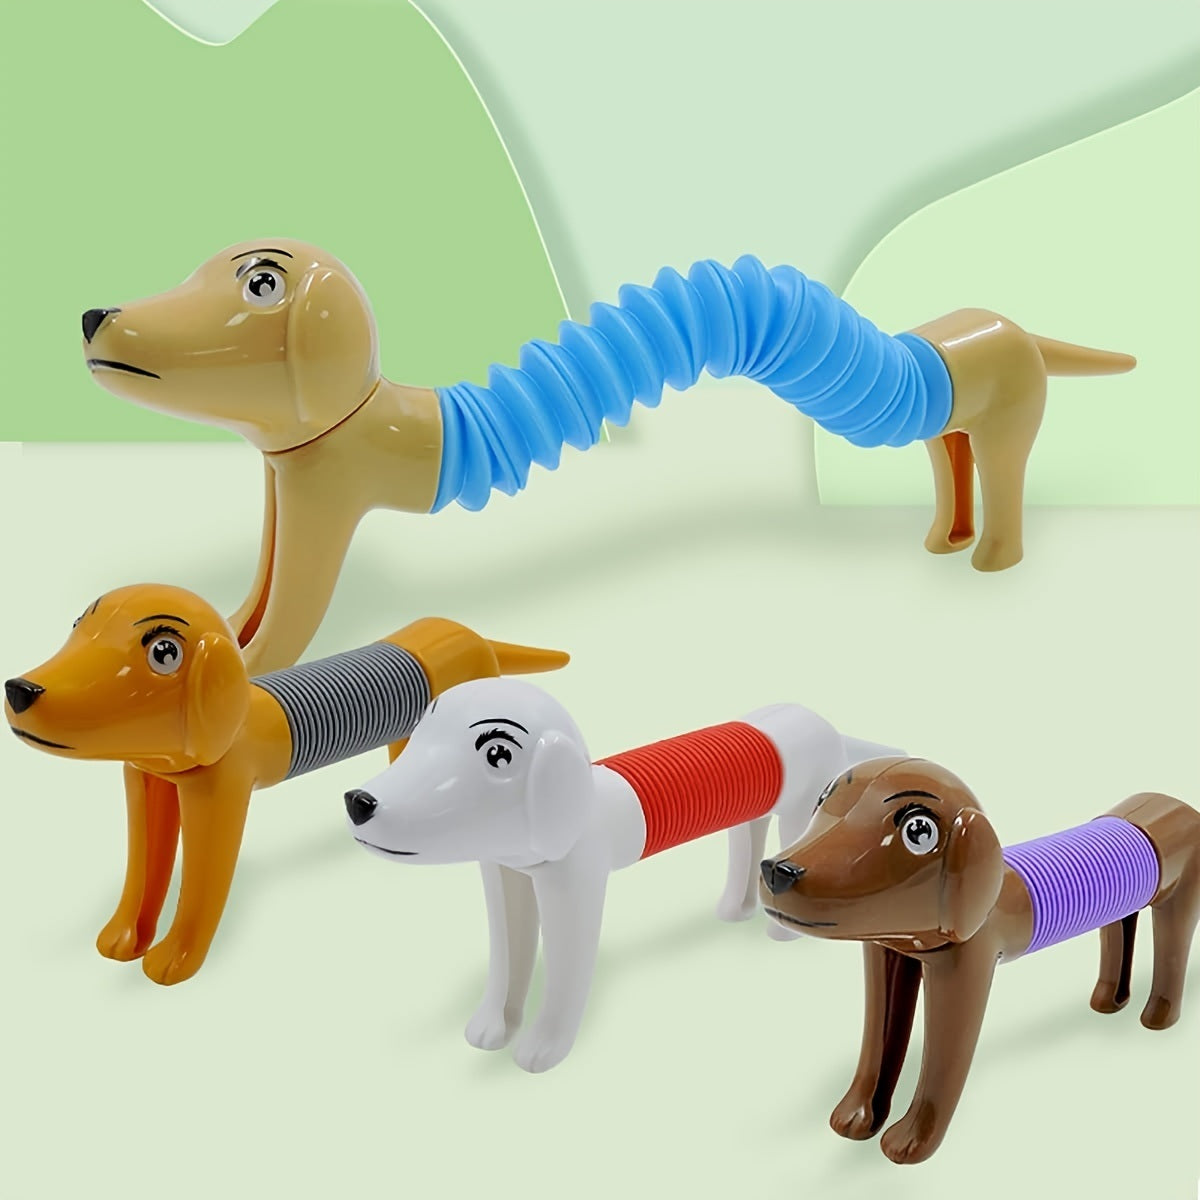 Four Dog Telescopic Tubes painted in brown with white patterns, each adorned with a colorful neck sleeve, are featured isolated on a white background.